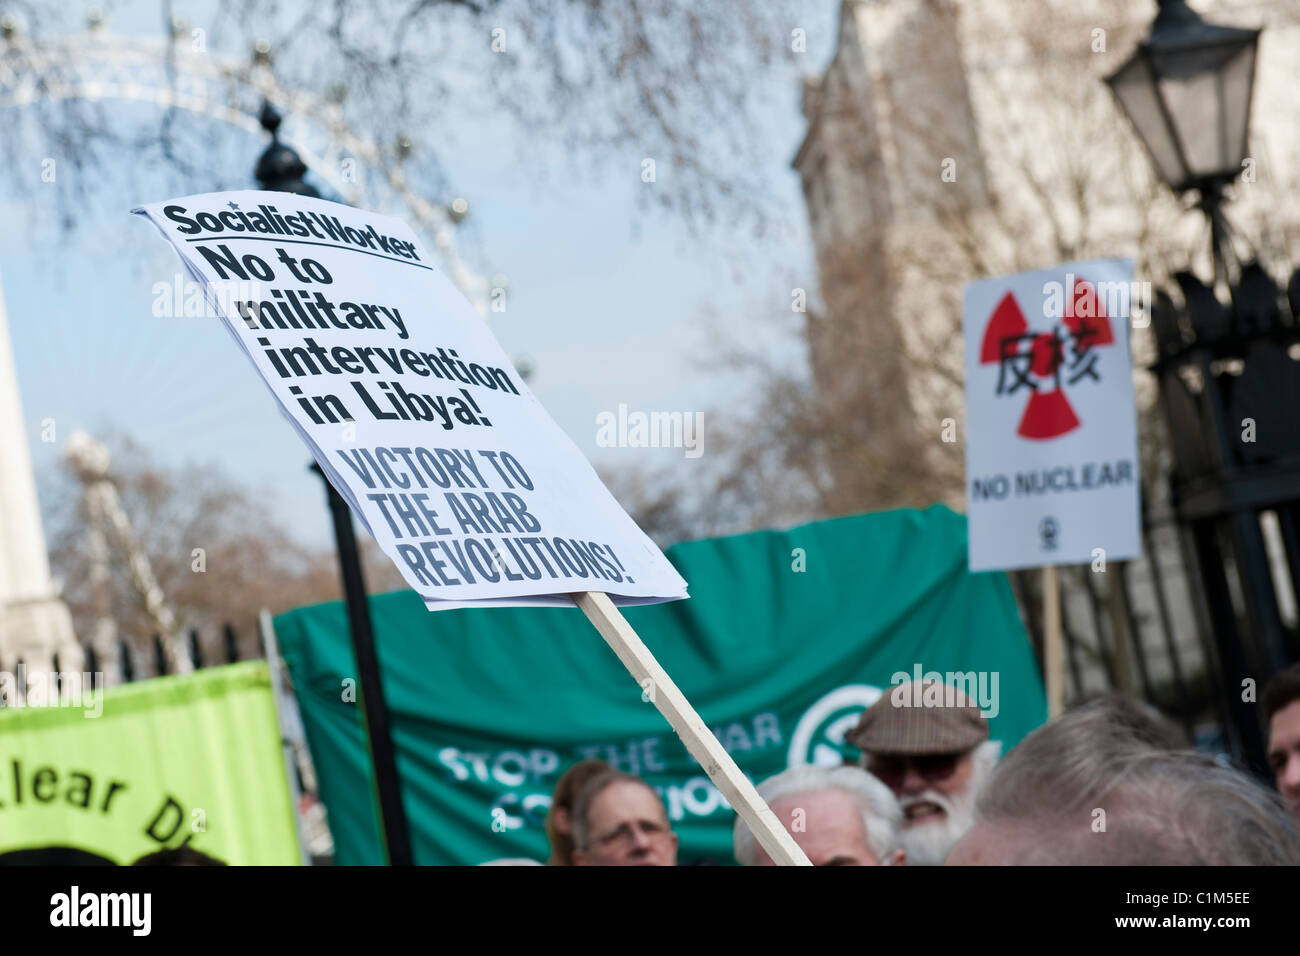 Members of the Communist Party of Great Britain stage a peace protest in support of Colonel Gaddafi in Libya Stock Photo